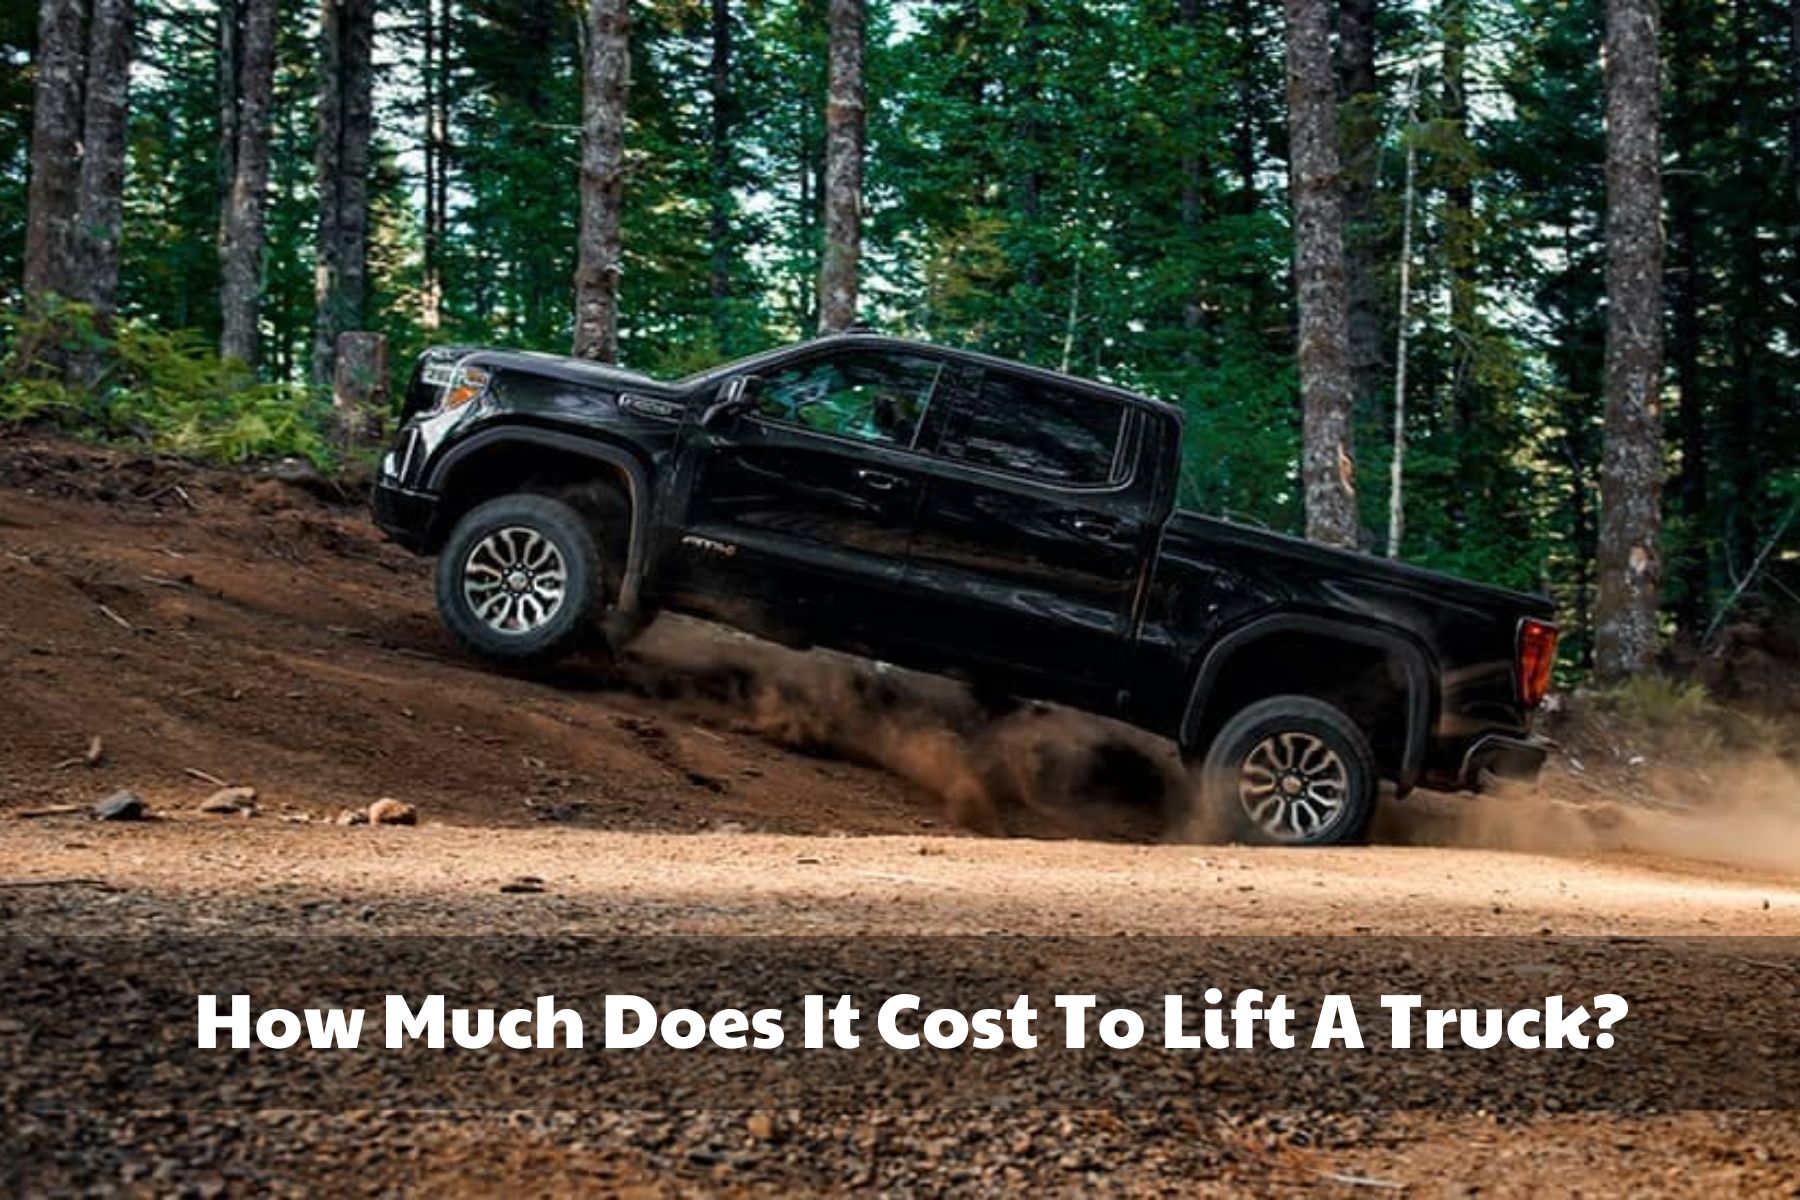 How Much Does It Cost To Lift A Truck